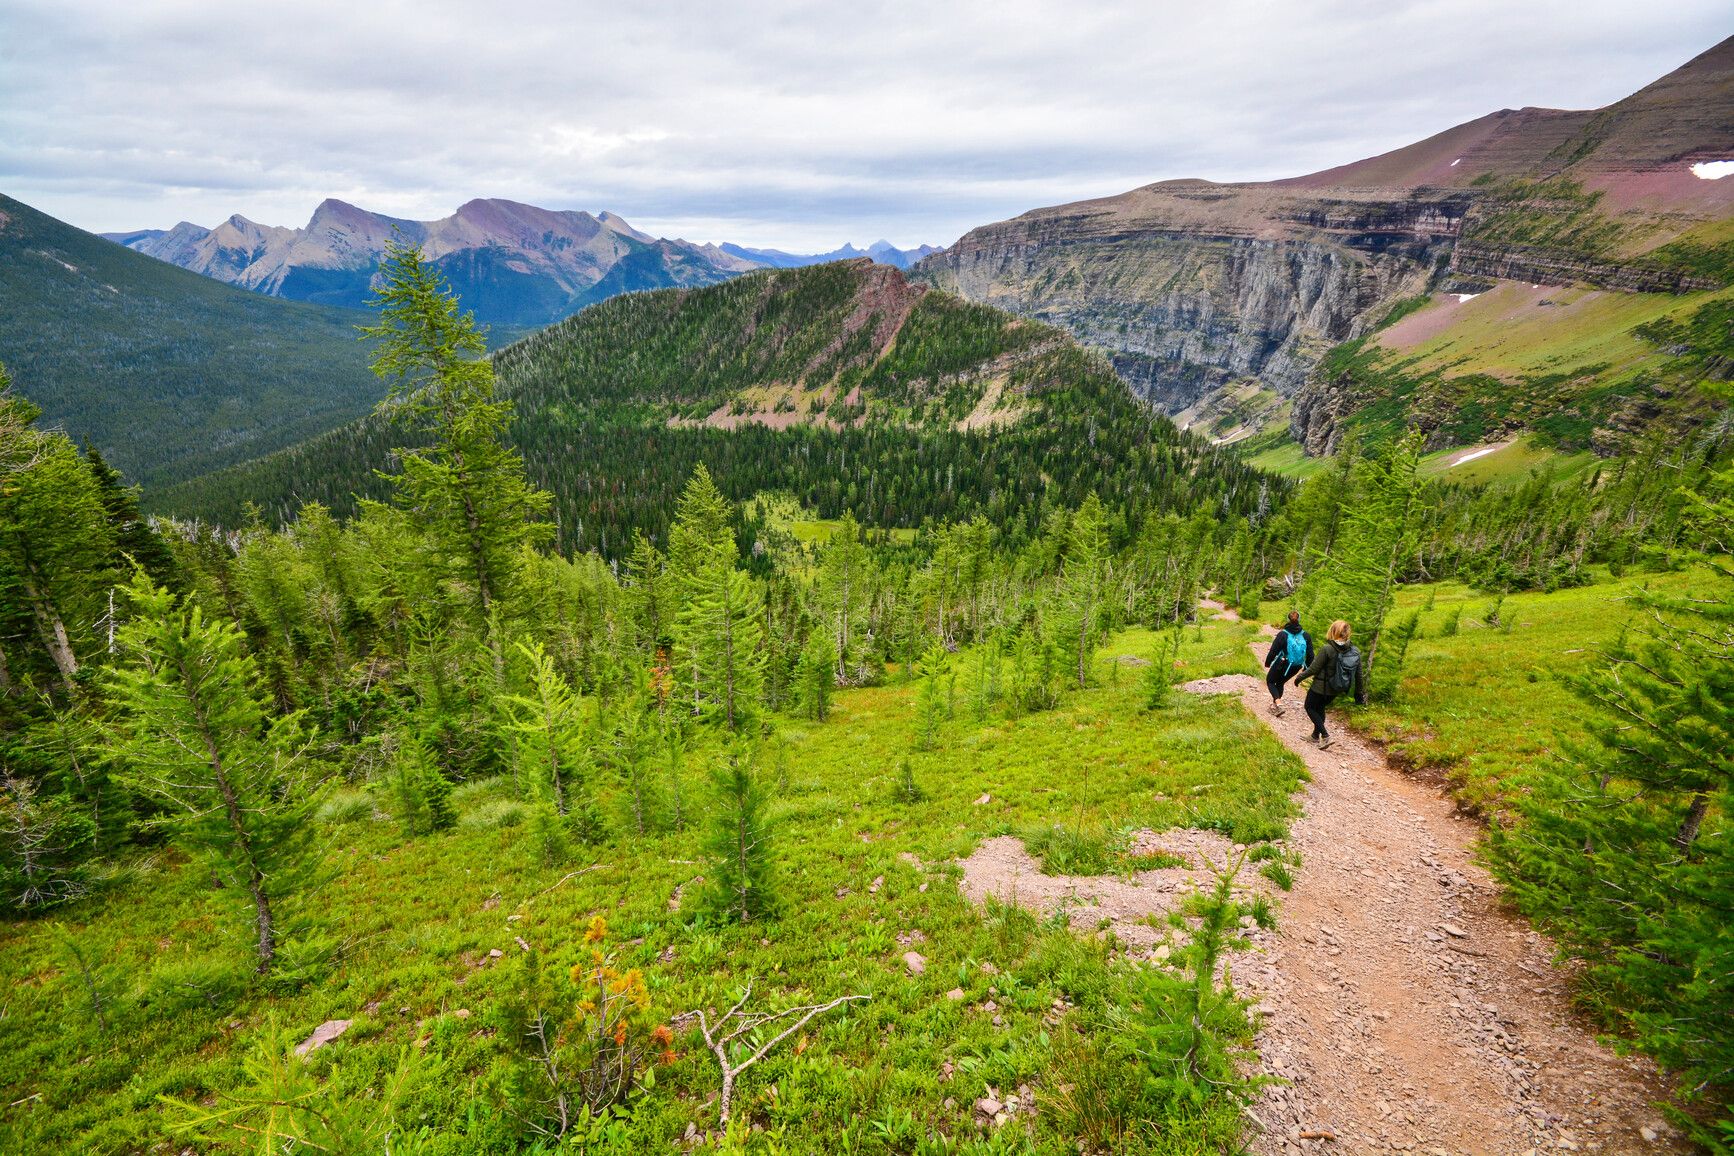 Hikers descend a mountain trail with views of mountains and forests. Akamina-Kishinena Park.